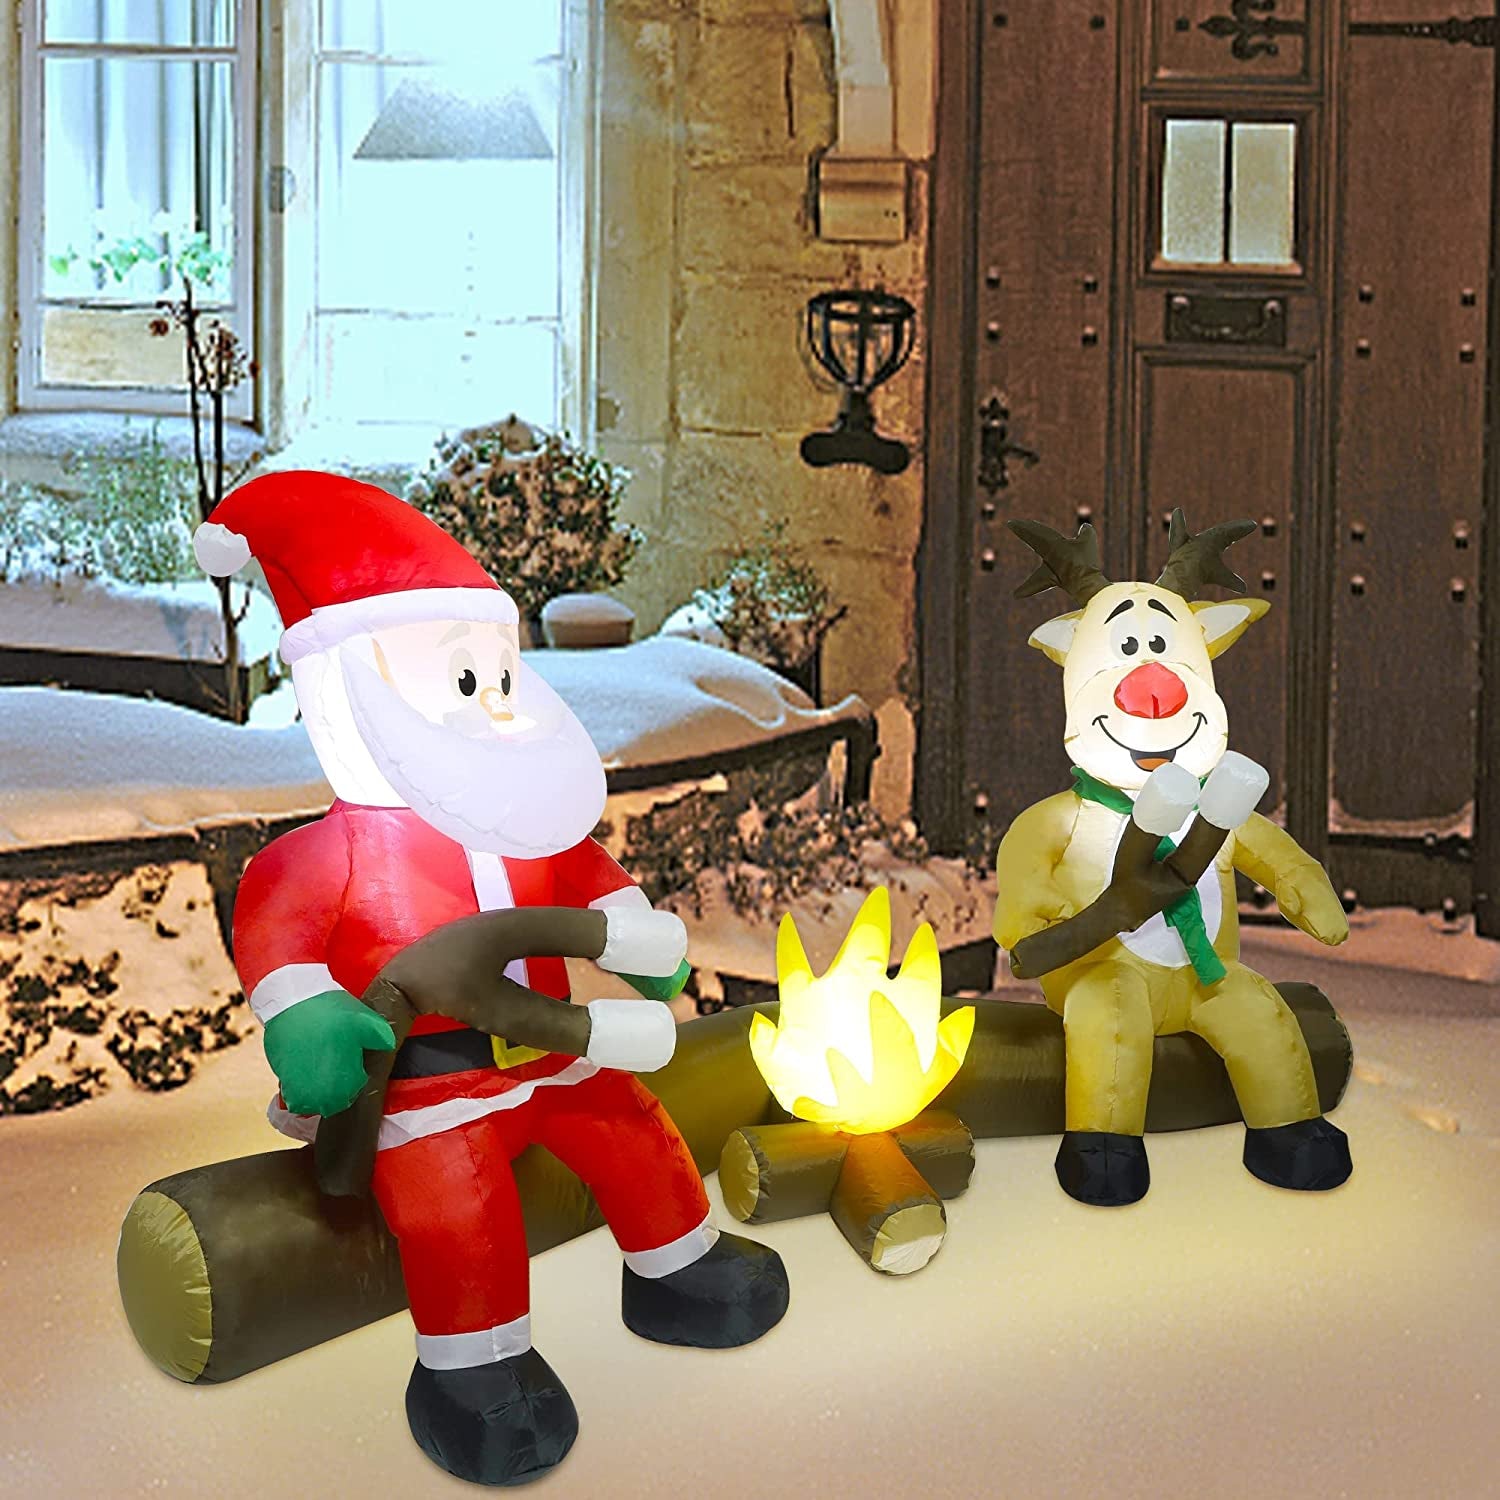 Christmas Inflatable Decorations, Light up Xmas Blowups for Winter Yard Lawn Garden Indoor Outdoor Decor (Santa and Reindeer Roasting Marshmallows over Campfire)